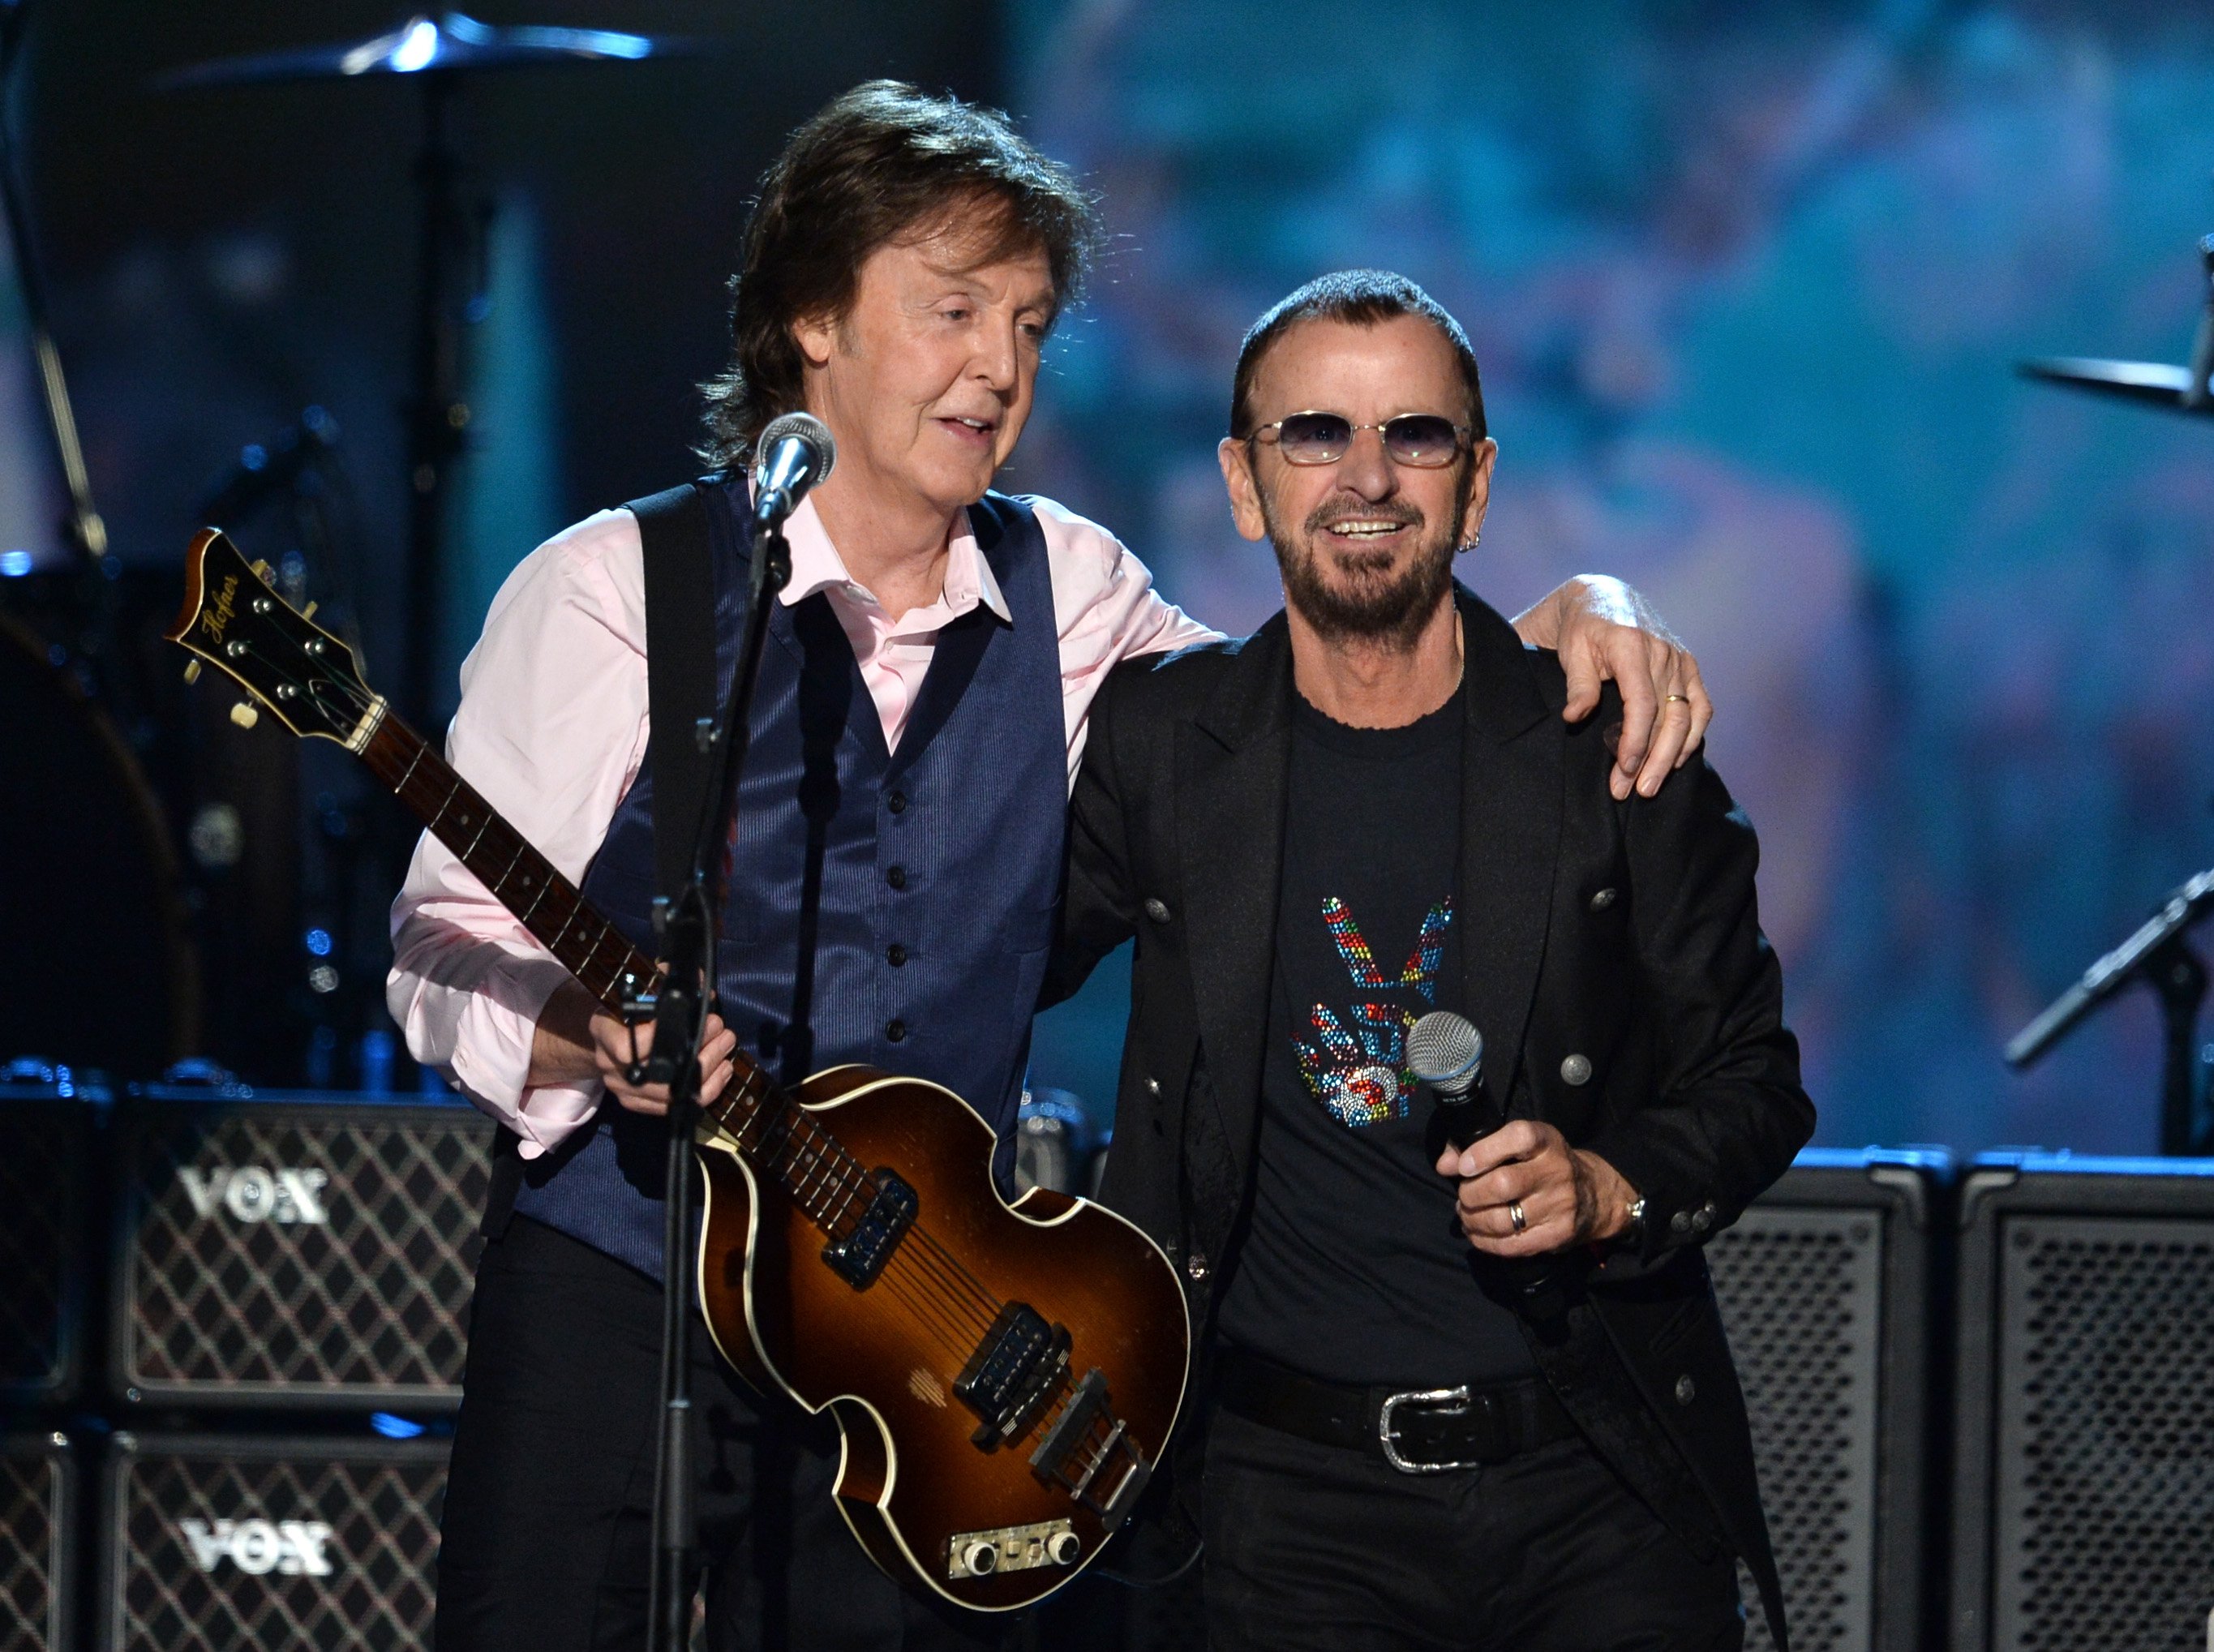 Paul McCartney holds a guitar and Ringo Starr holds a microphone. They stand on a stage.